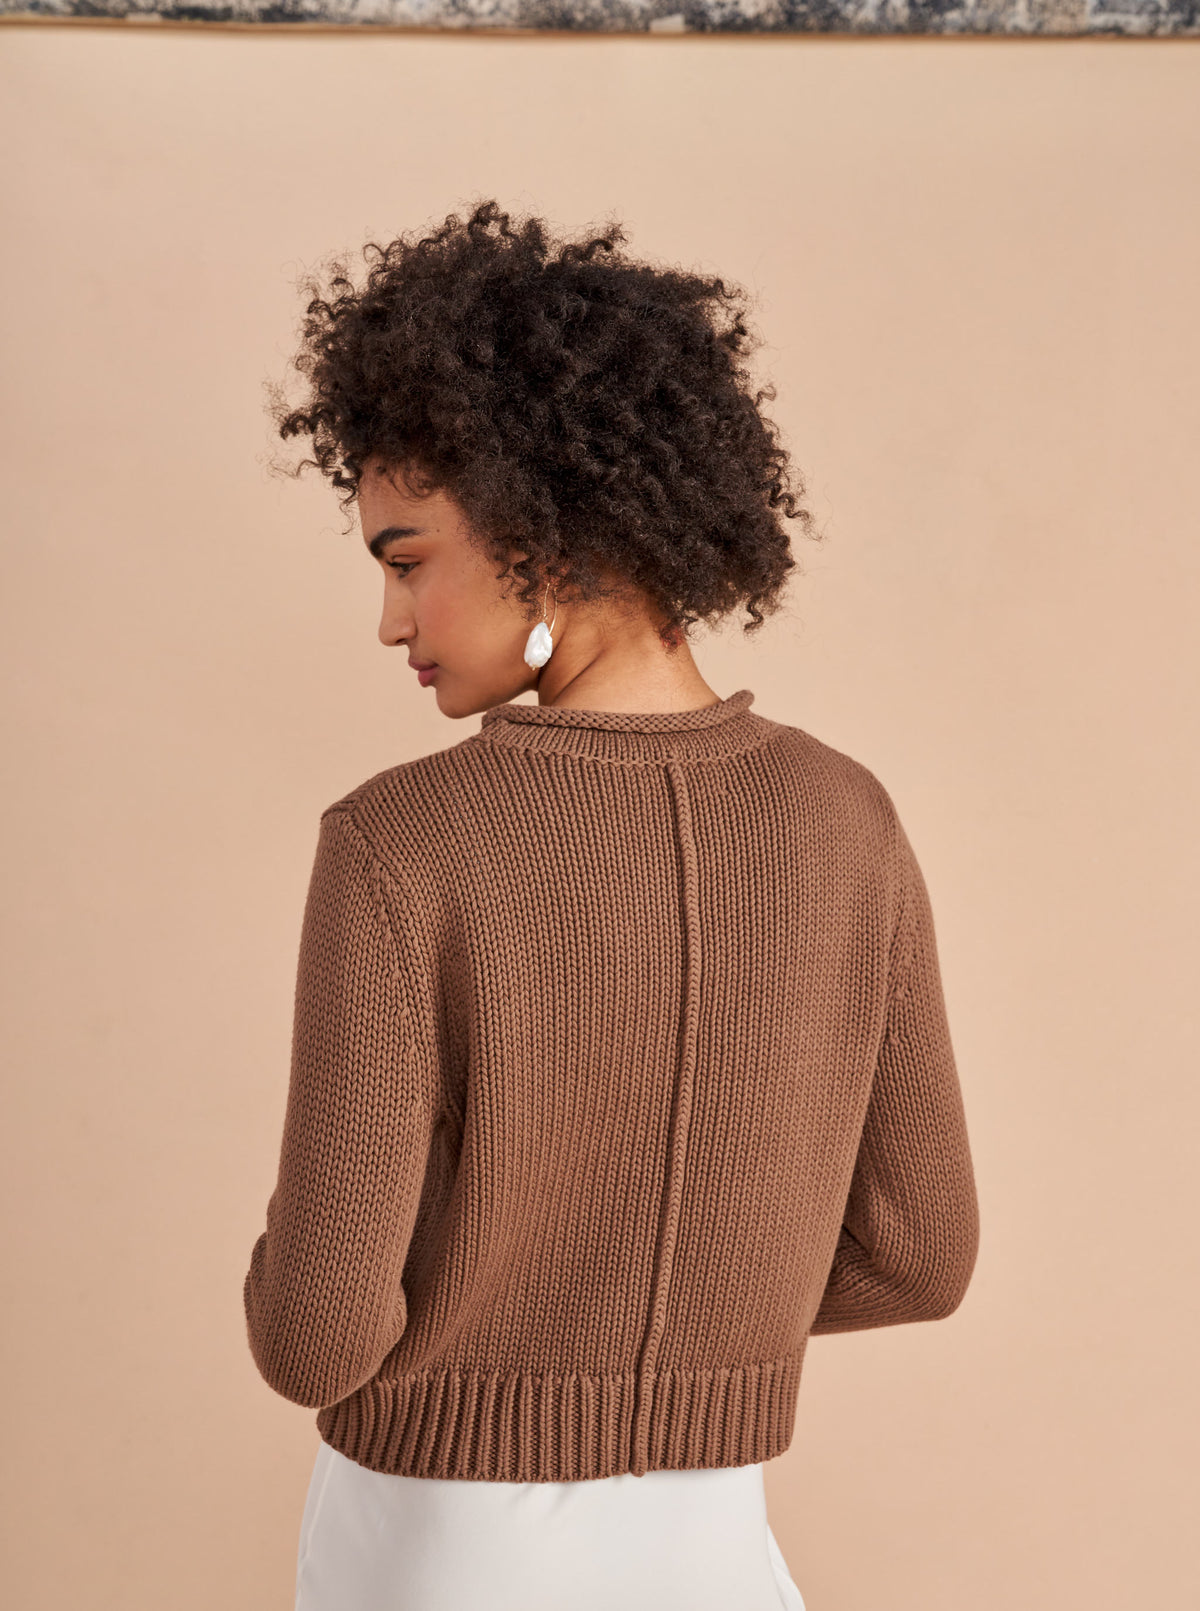 Our infamous Mini Marina Sweater, now in solid colors so get on board whether you are in the mood for all over stripes or not in our best-selling, chunky, 100% cotton sweater with our signature Marina rollneck that you know and love us for.